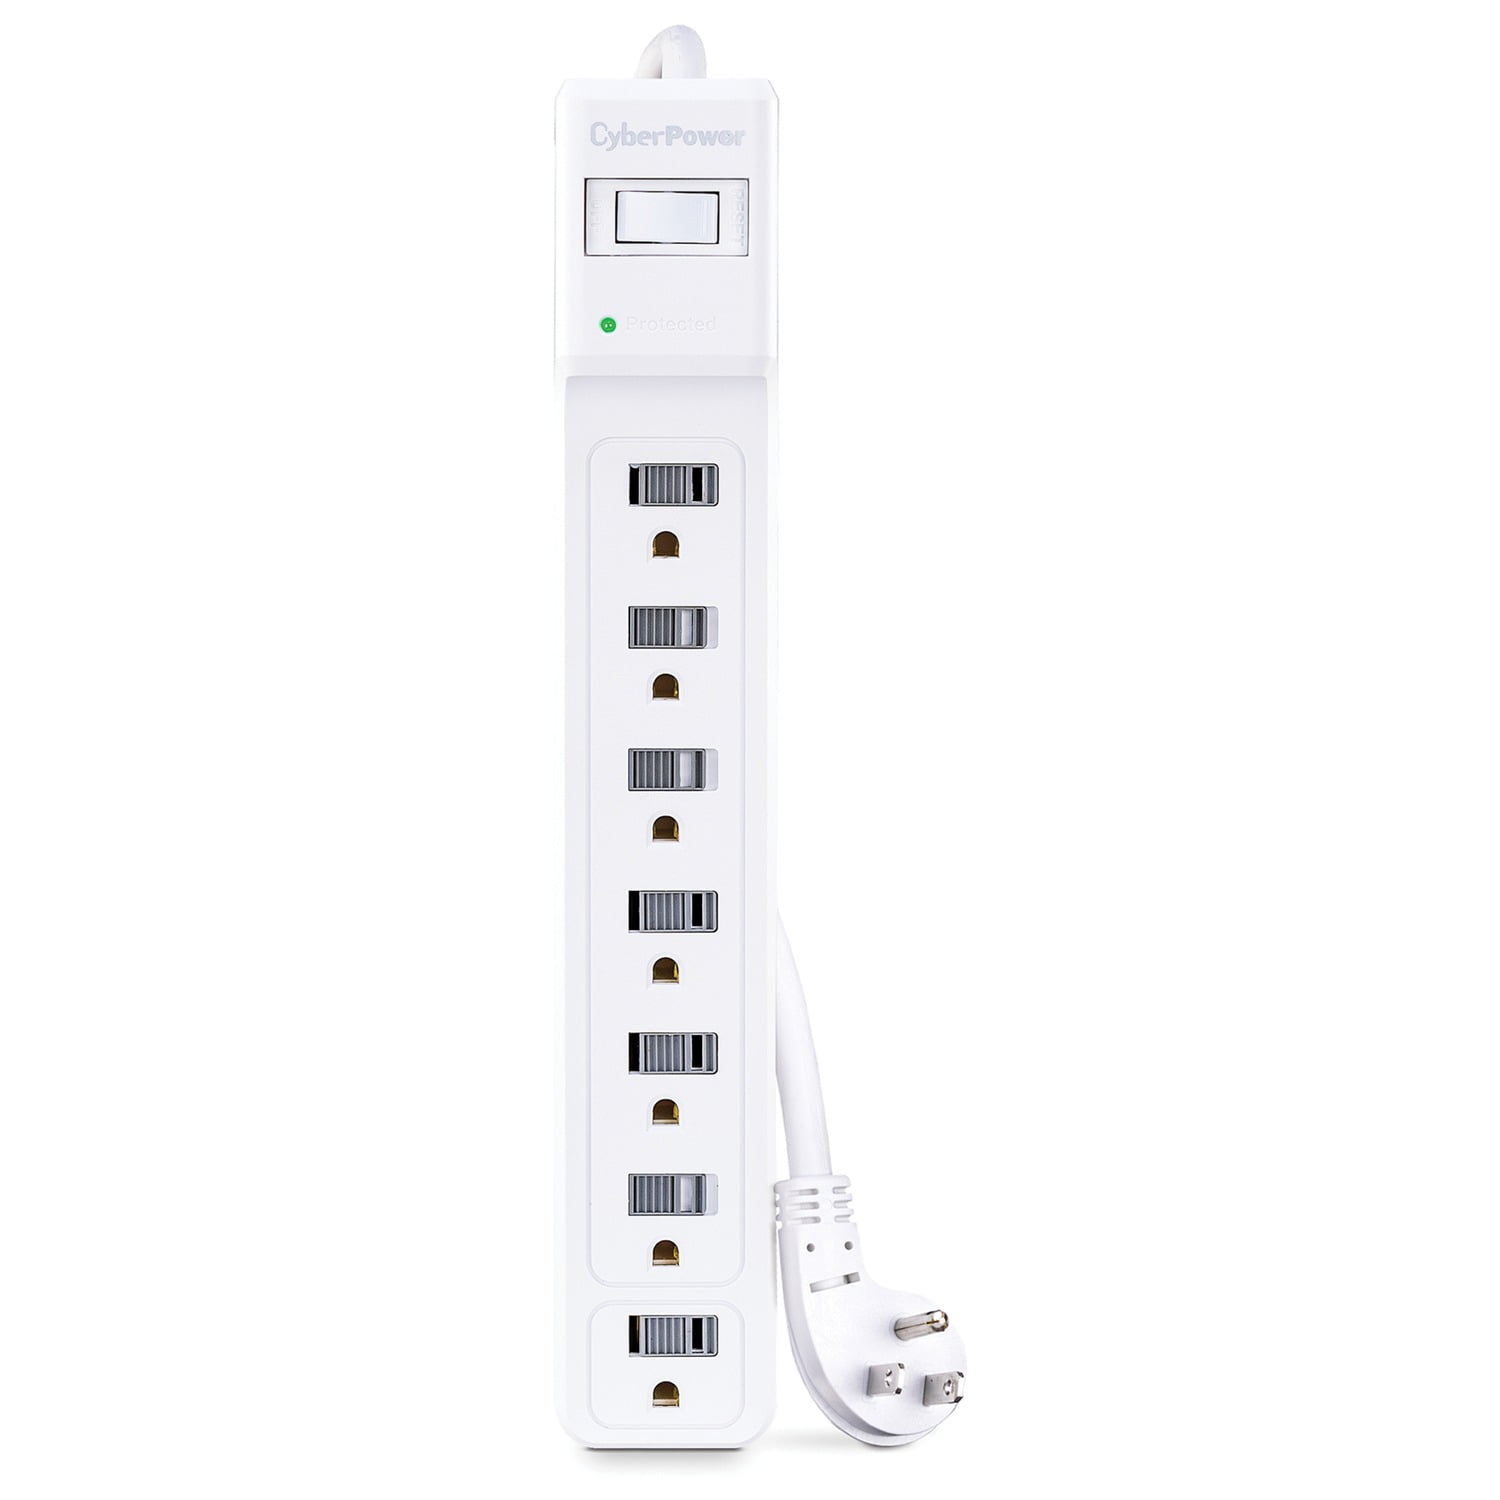 CyberPower B704 Essential Series B704 7-Outlet Power Strip Surge Protector